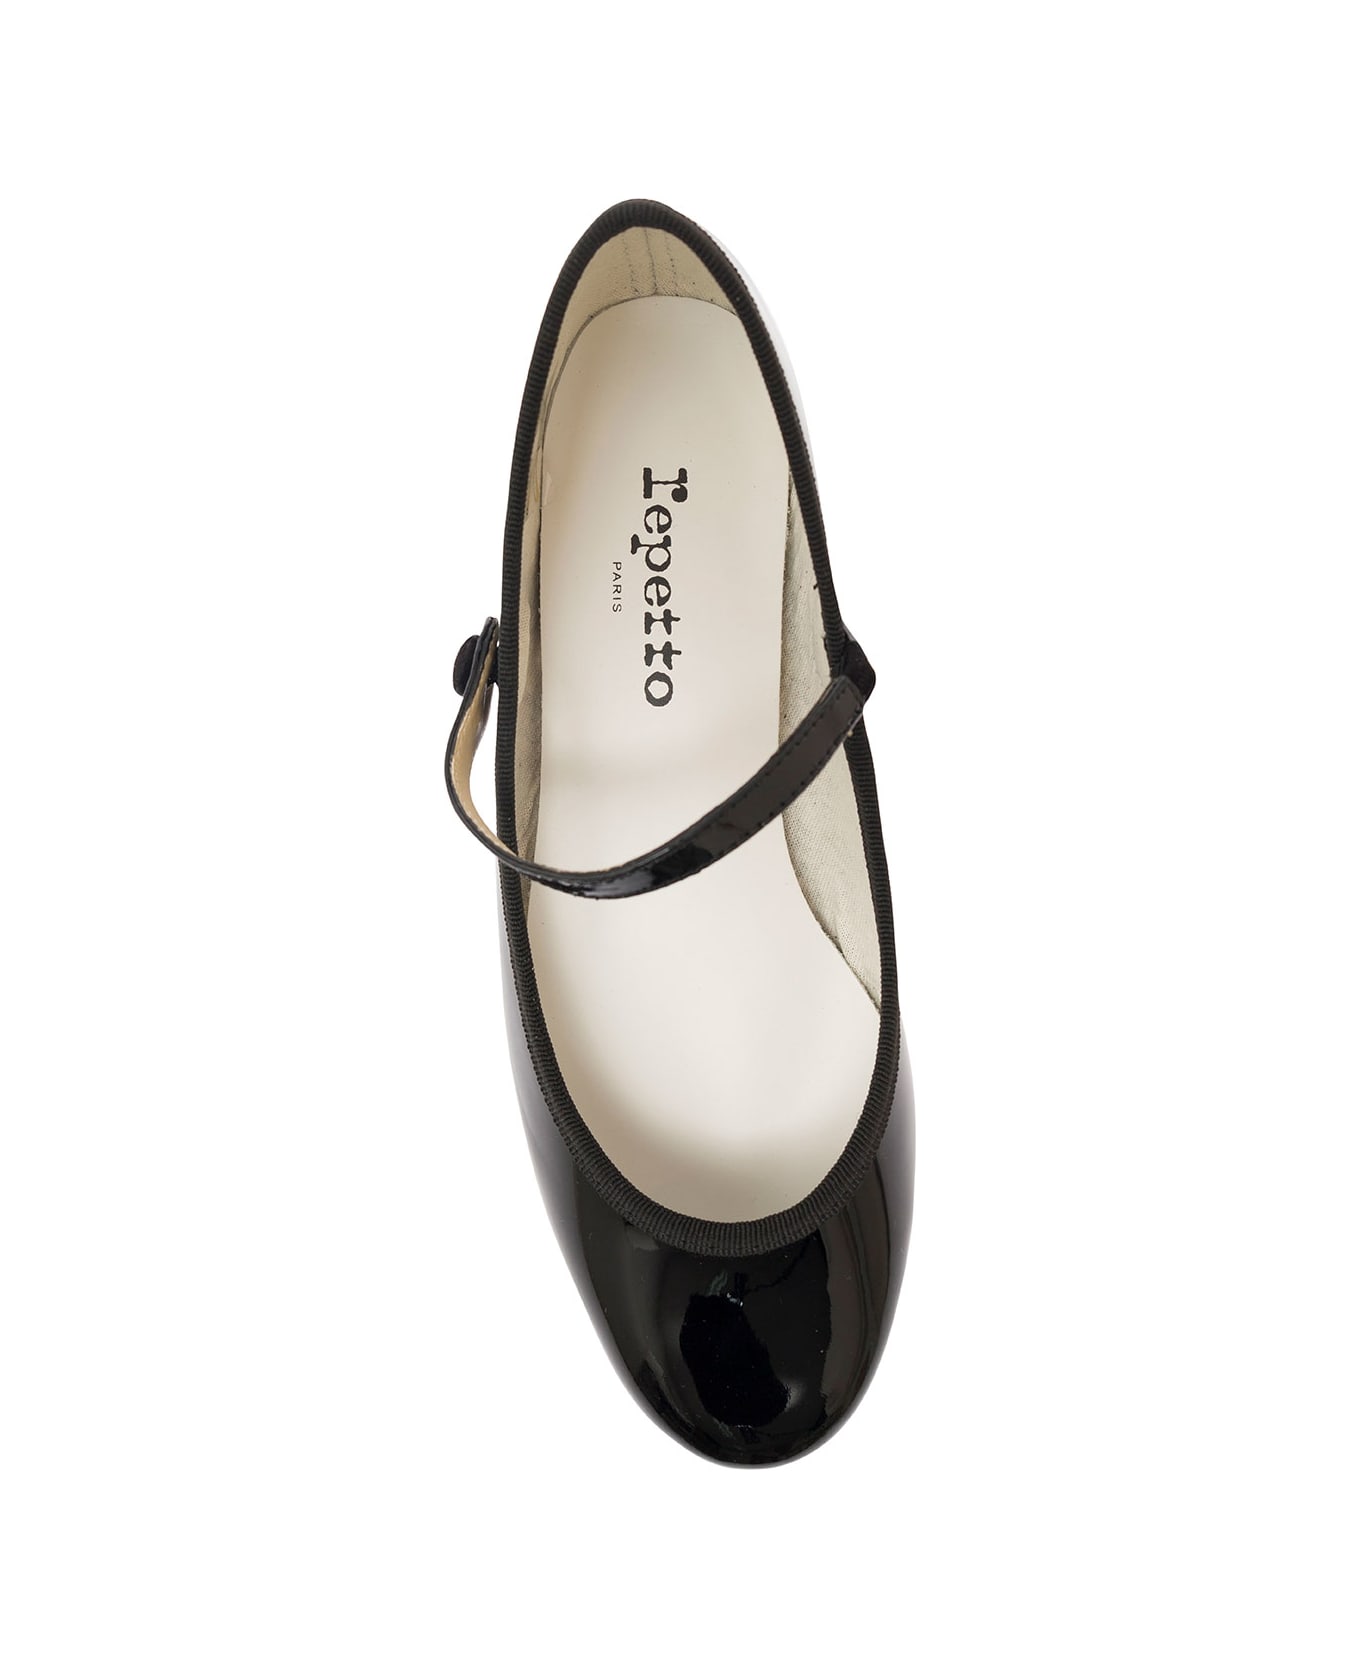 Repetto 'rose' Black Mary Janes With Strap In Patent Leather Woman - Black